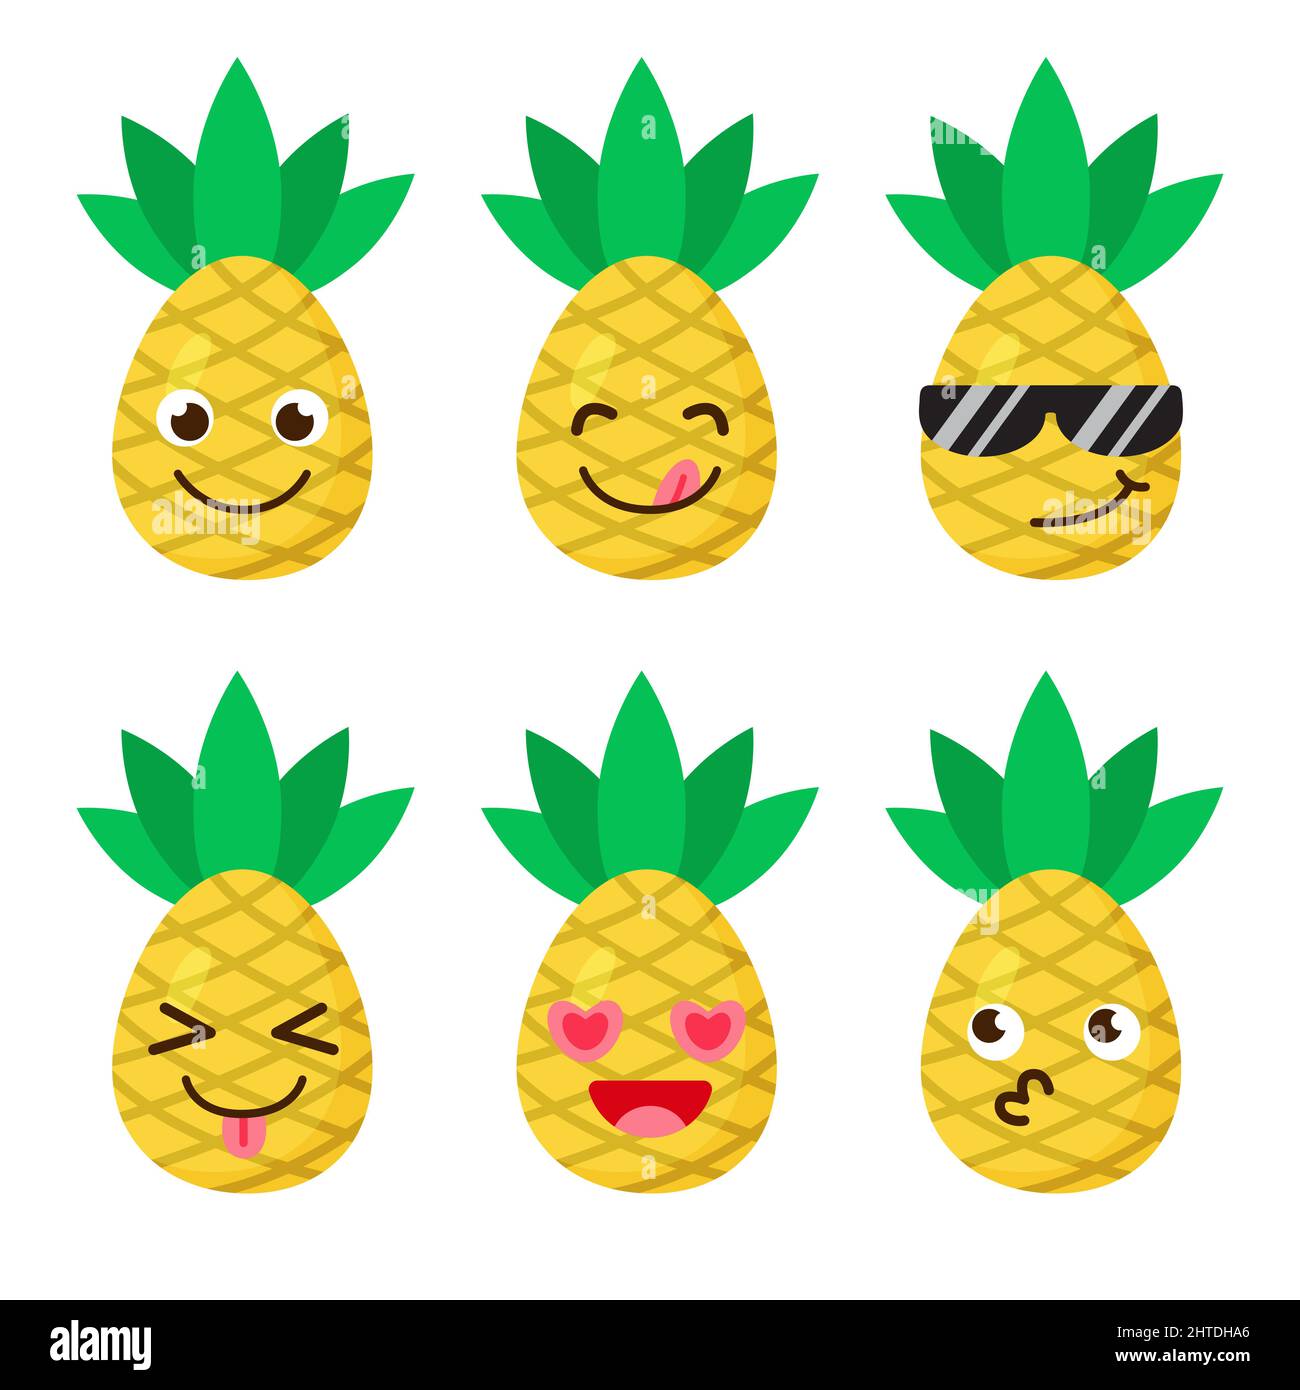 Set of pineapple emojis. Kawaii style icons, fruit characters. Vector illustration in cartoon flat style. Set of funny smiles or emoticons. Good Stock Vector